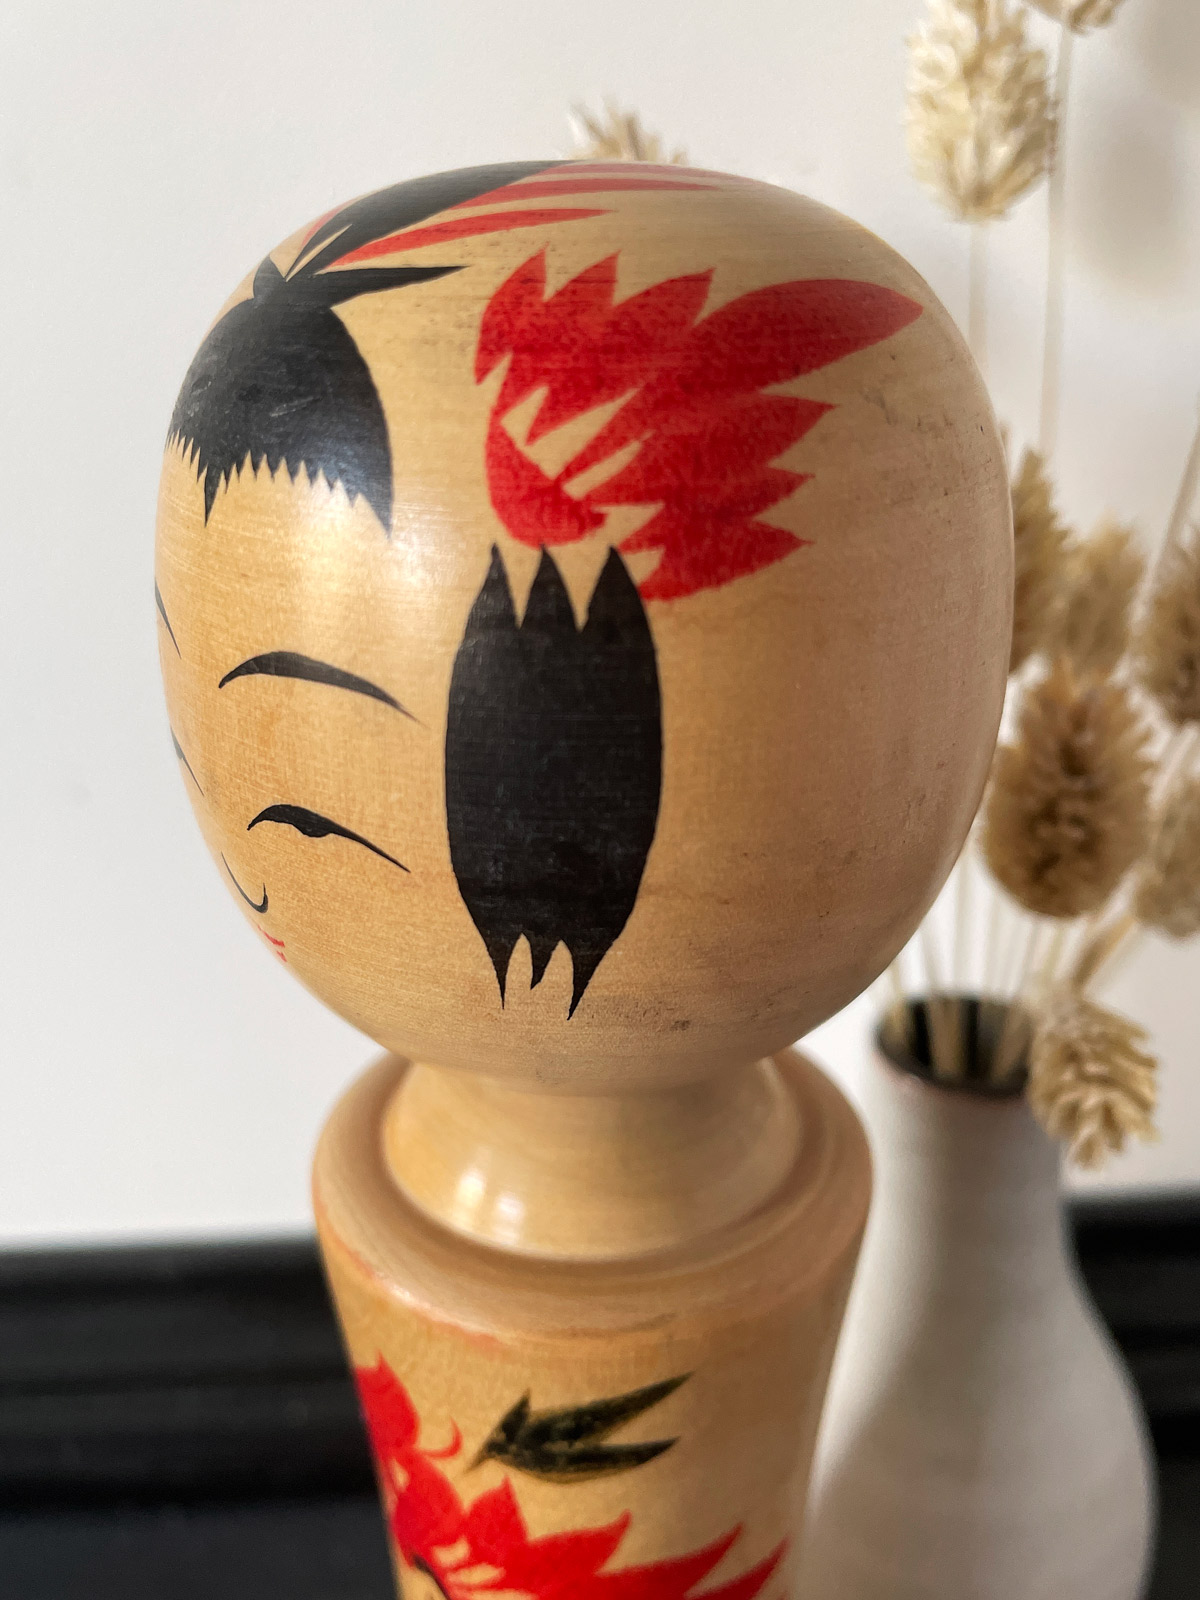 Traditional wooden Kokeshi doll in Narugo style